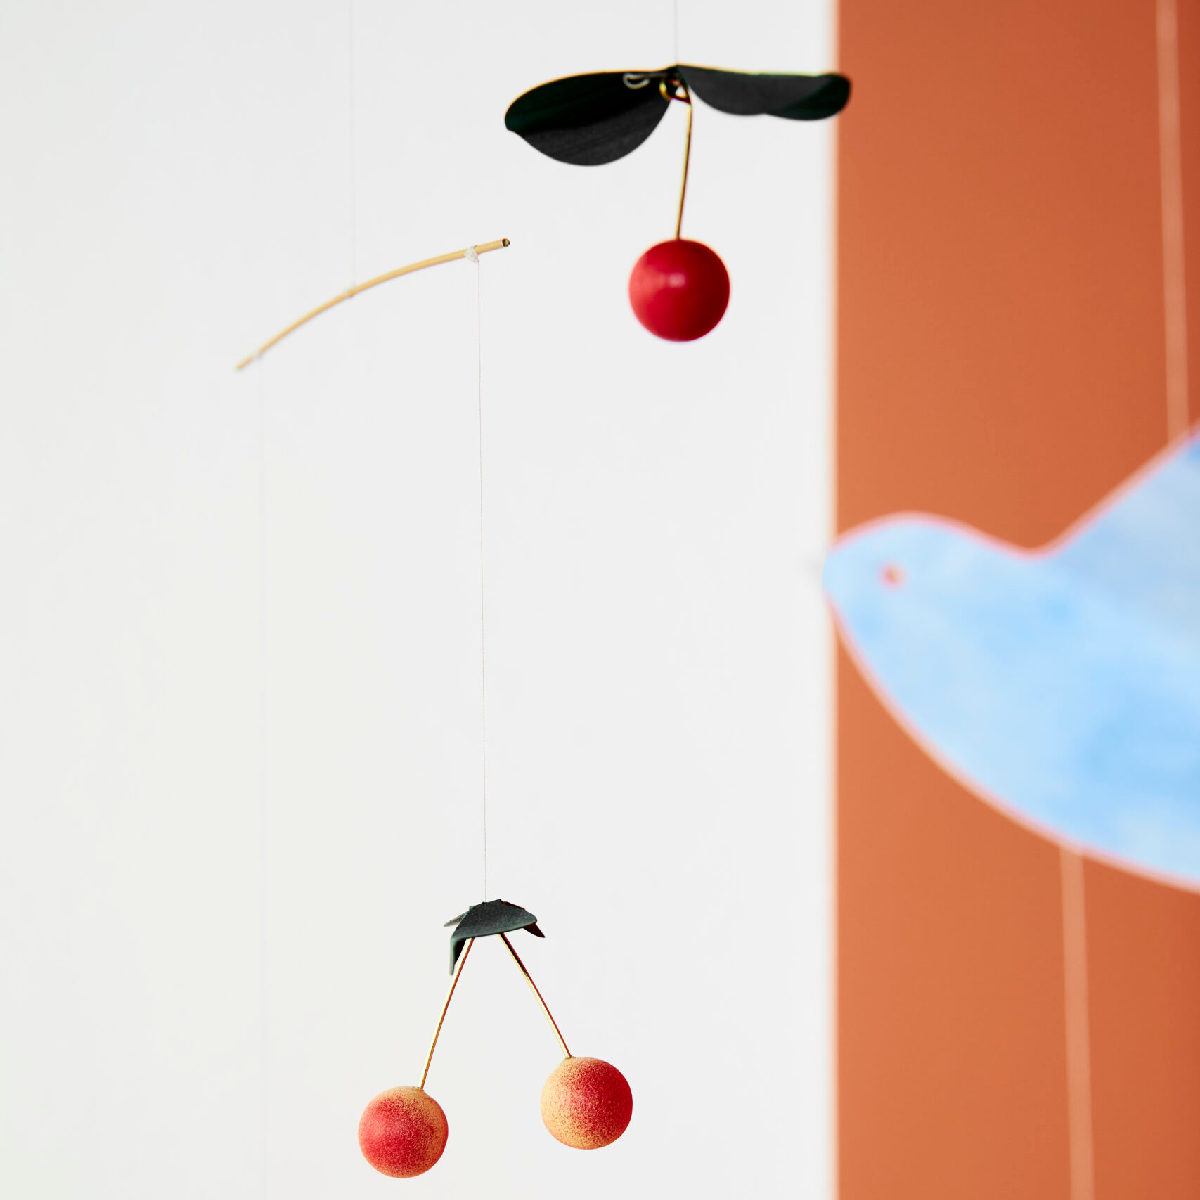 Charming Decorative Mobile "Cherry Birds" with Cherries and a Dove (45 x 42 cm)